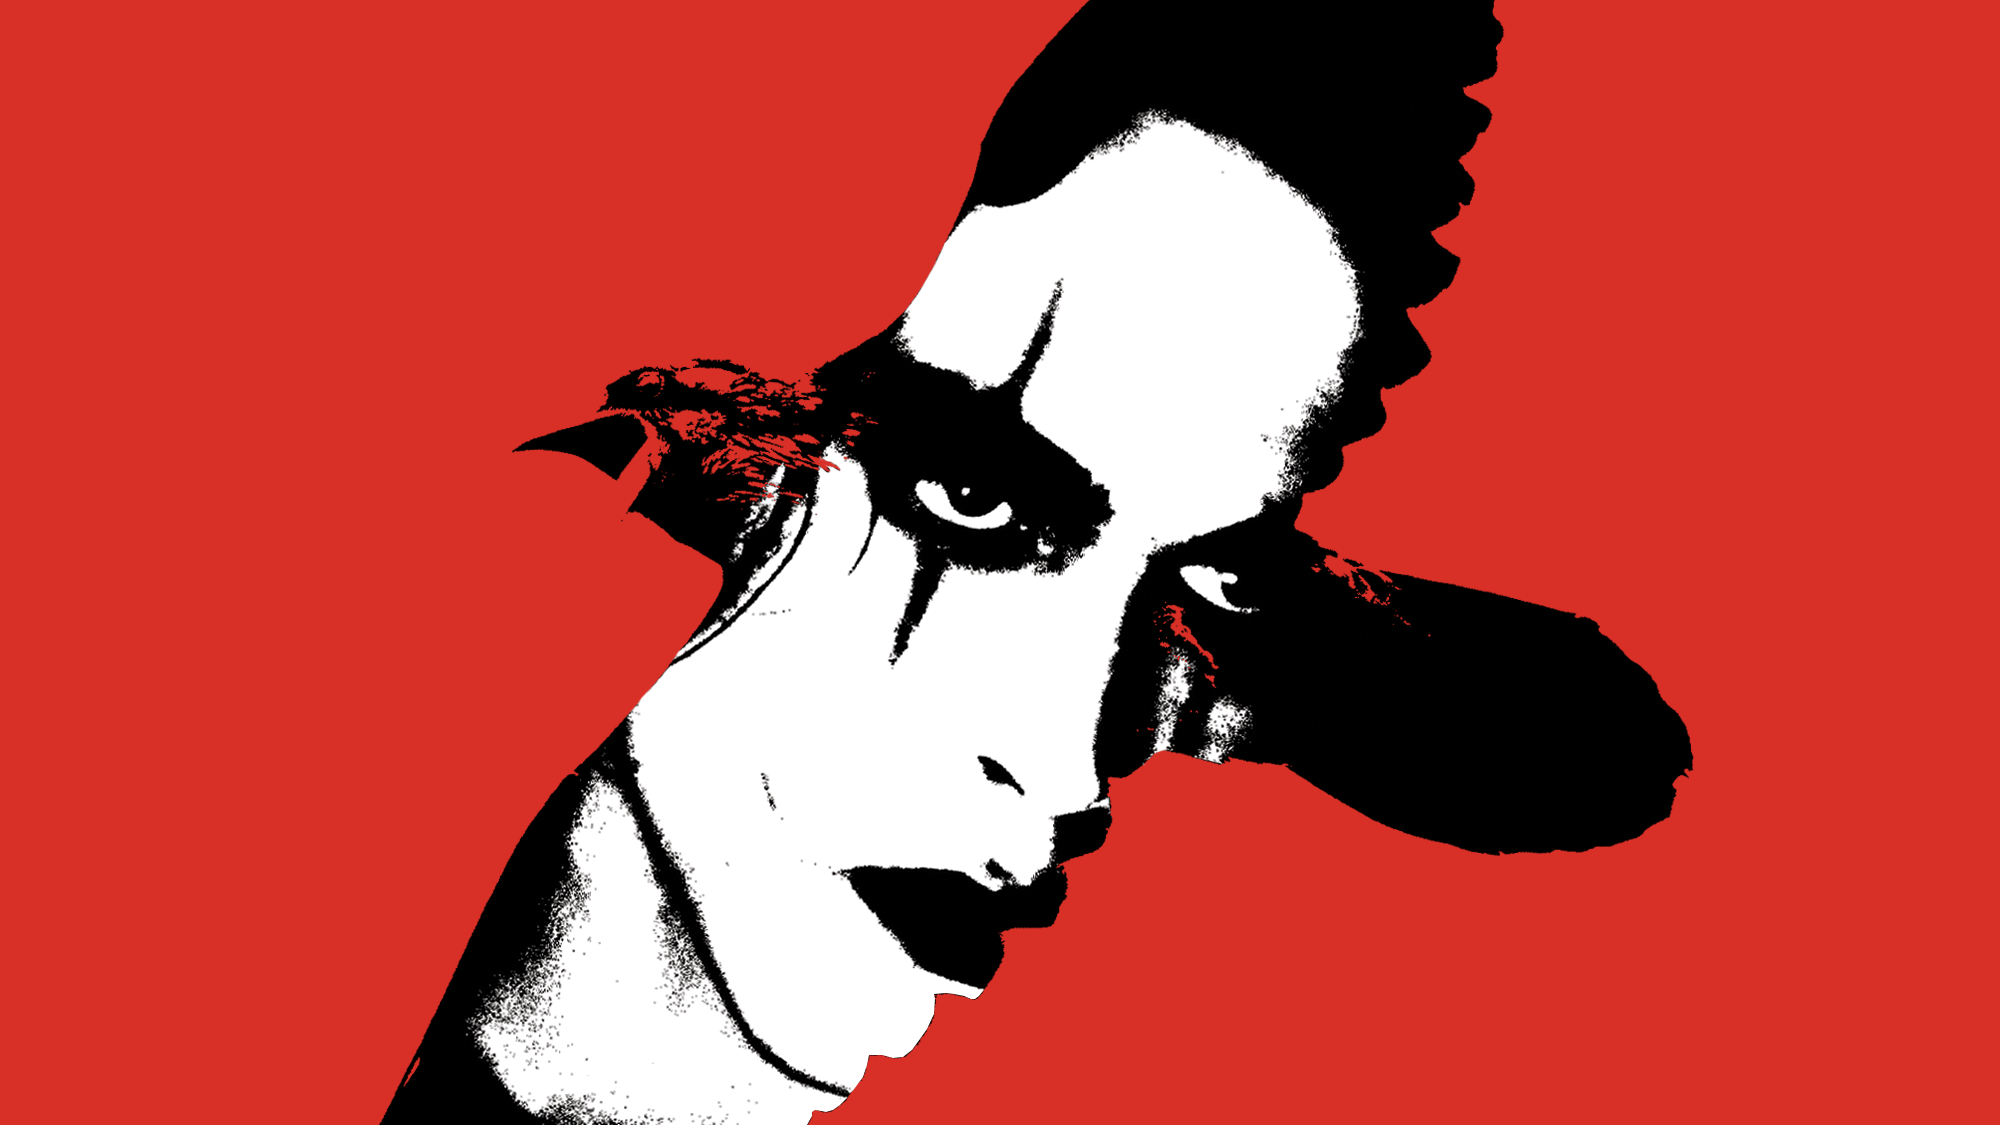 An image of the main character from The Crow